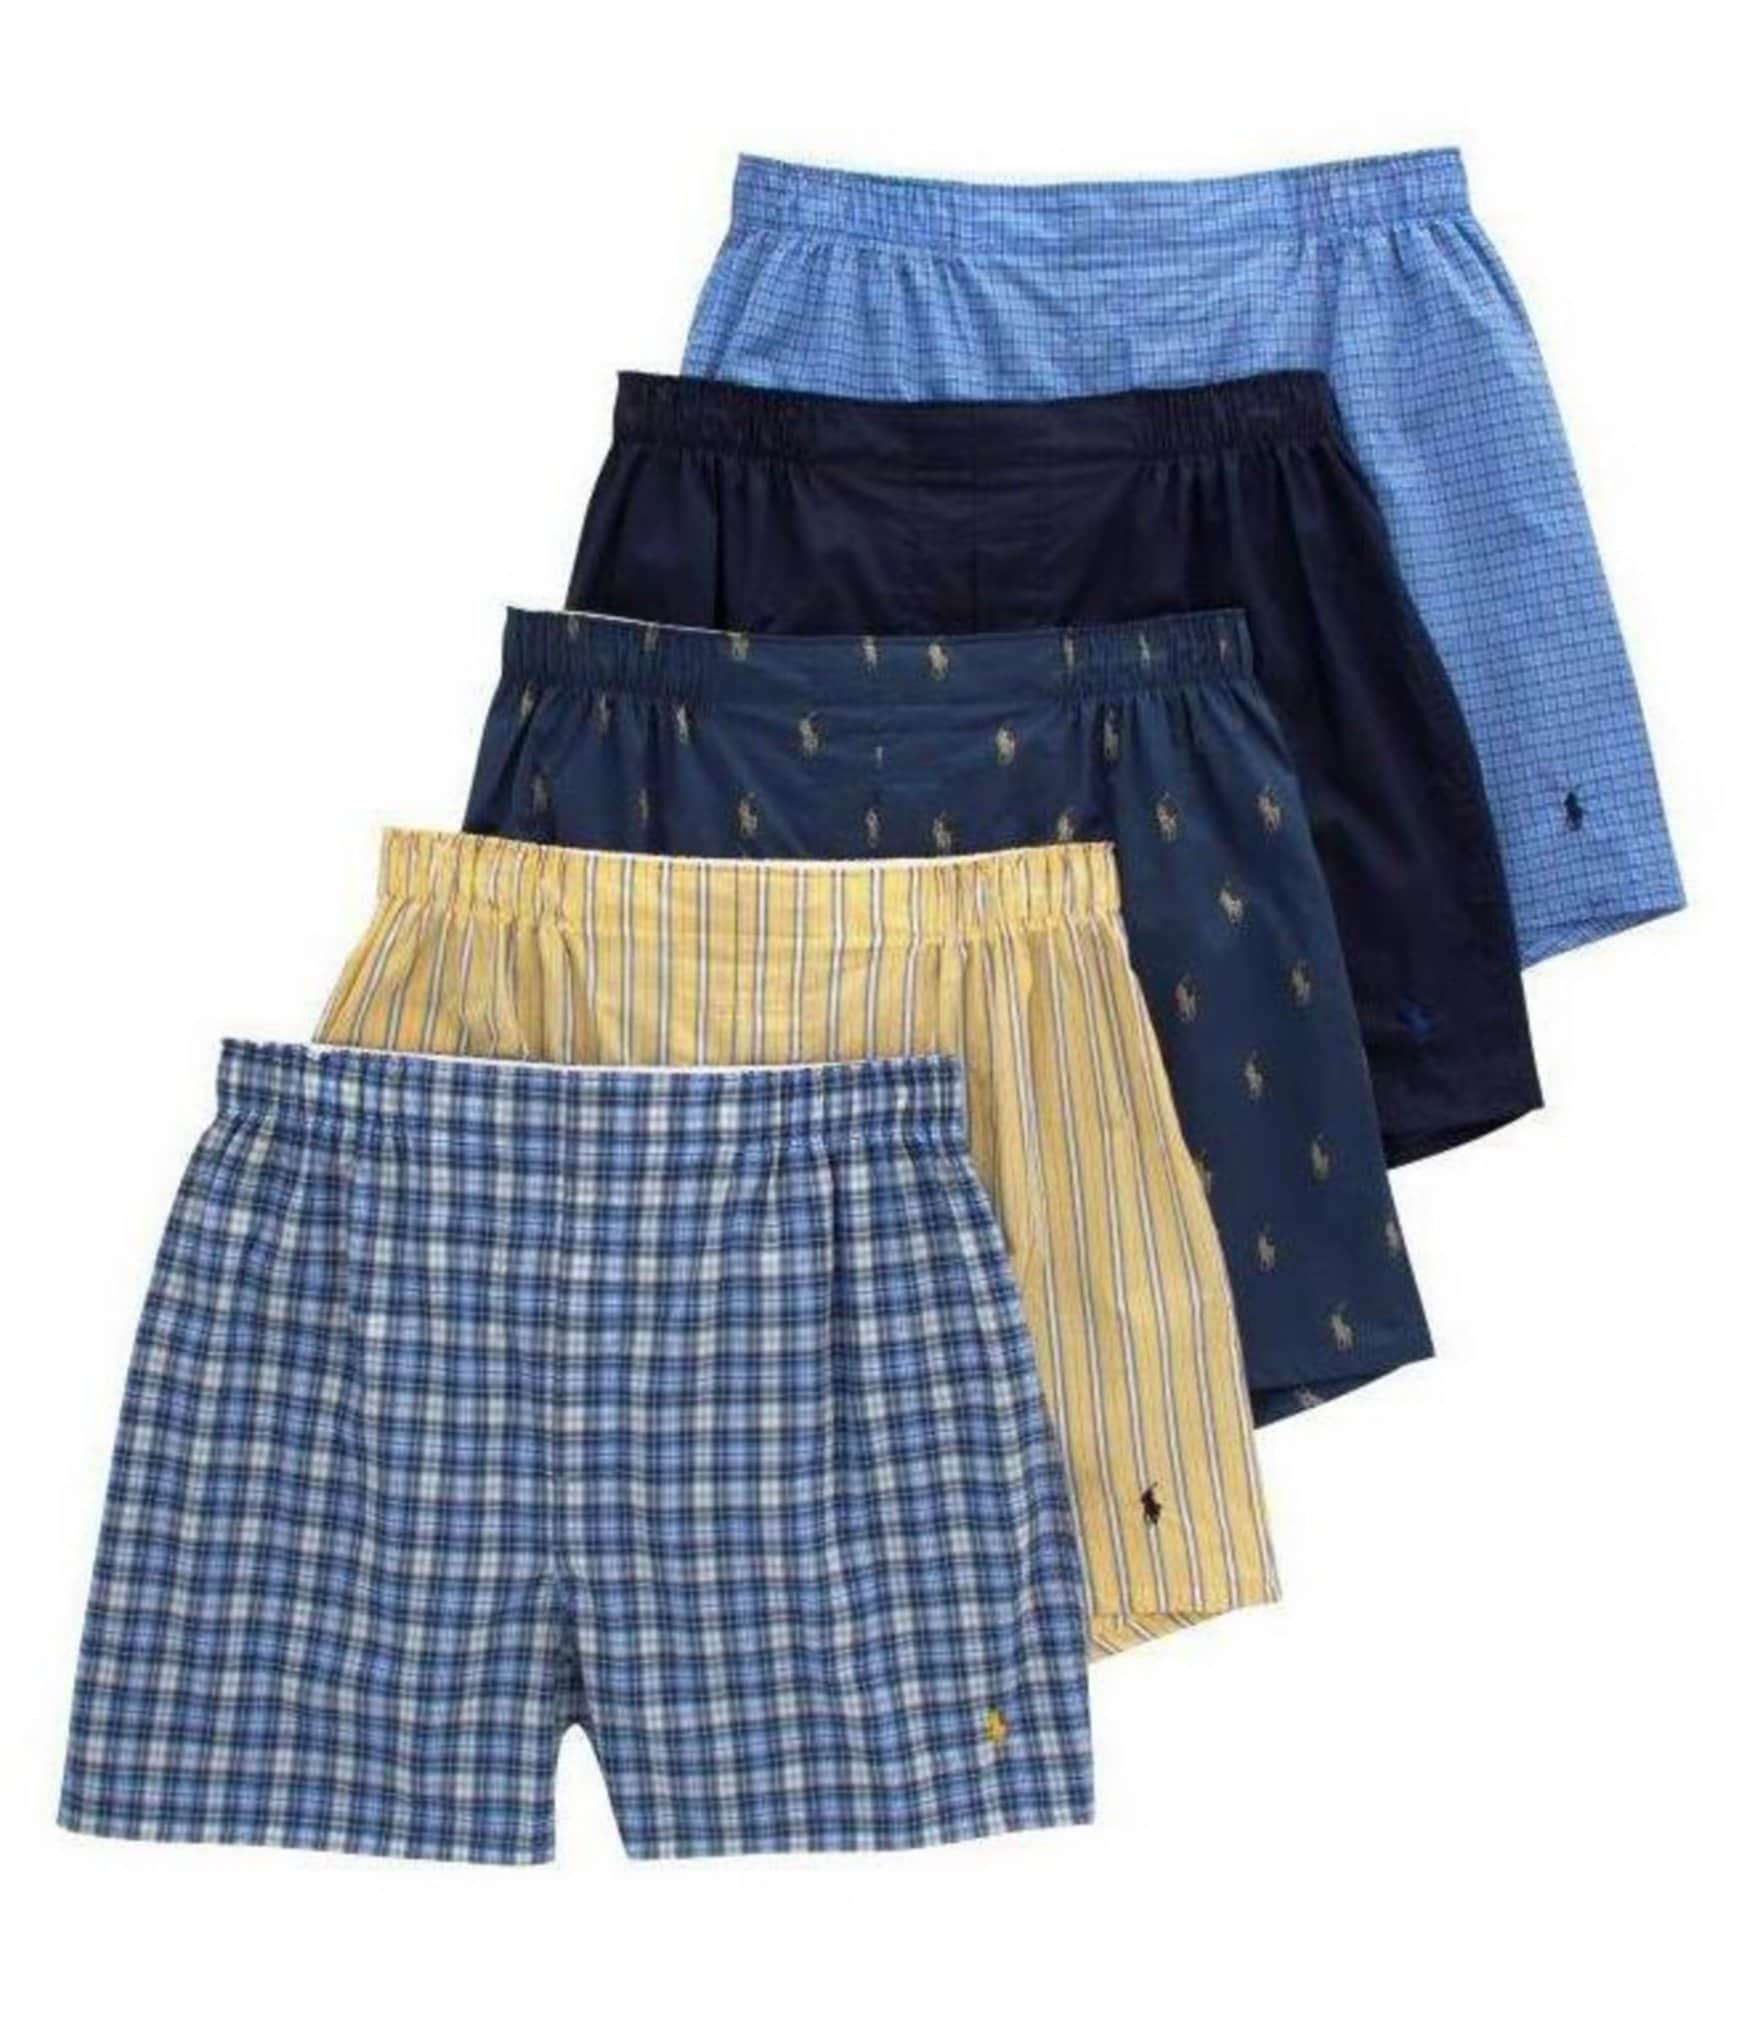 5pk Pure Cotton Assorted Woven Boxers